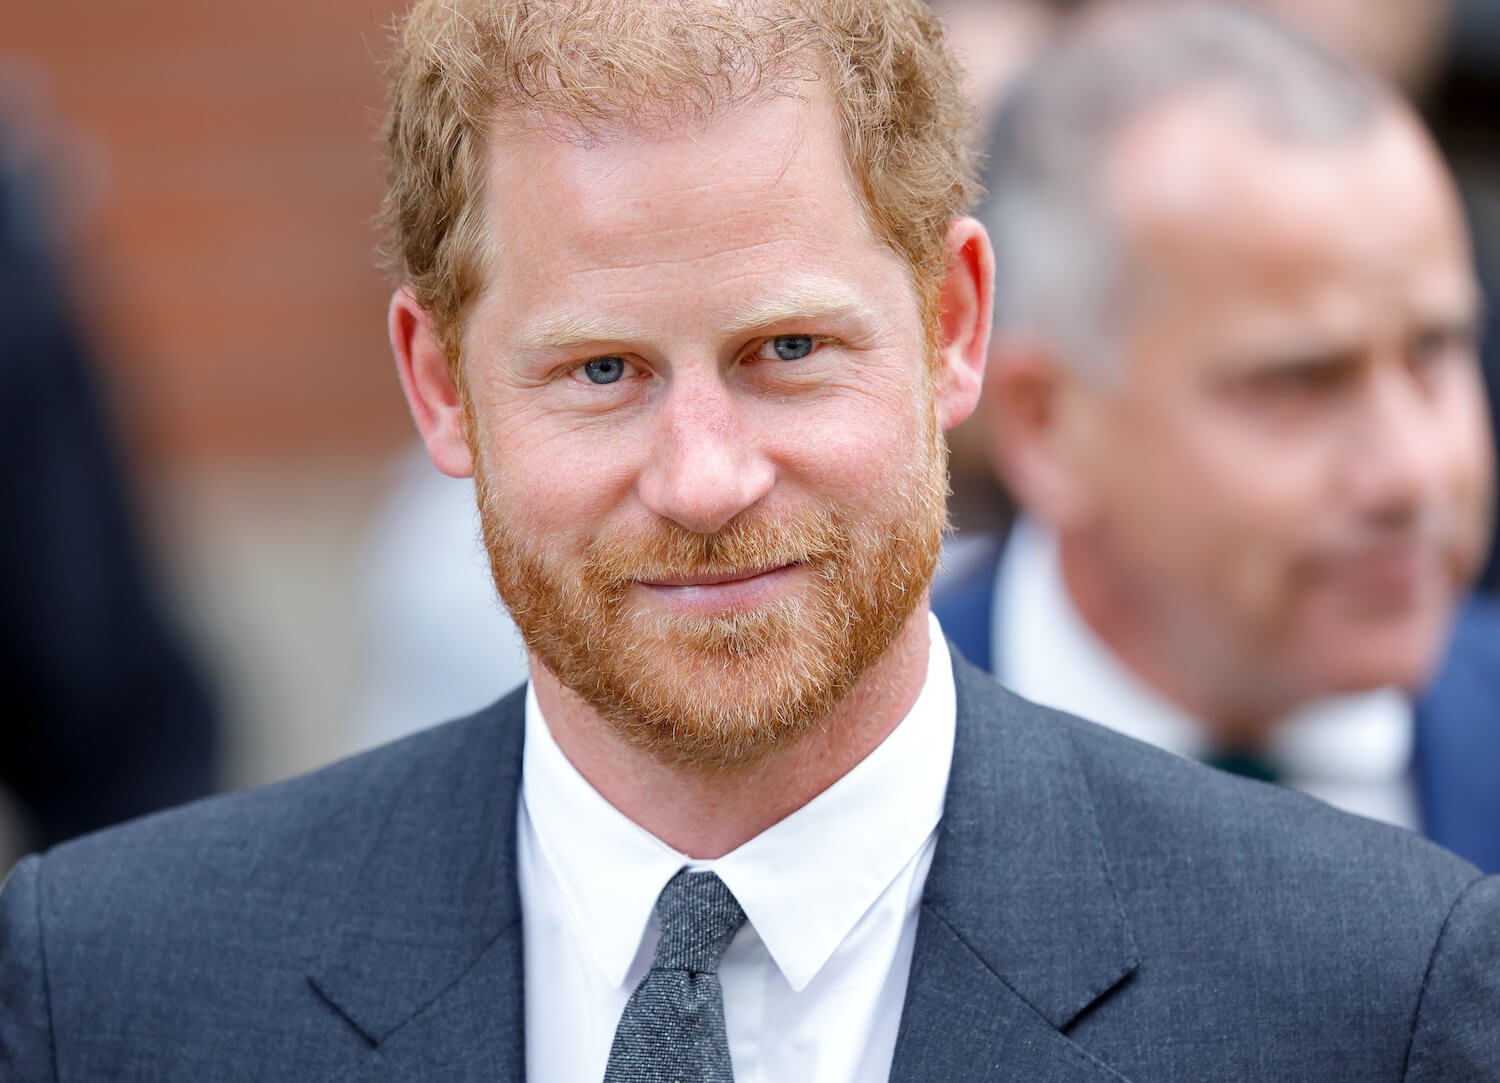 Prince Harry Could Pull 'Self-Absorbed Stunt' at Coronation, Royal ...